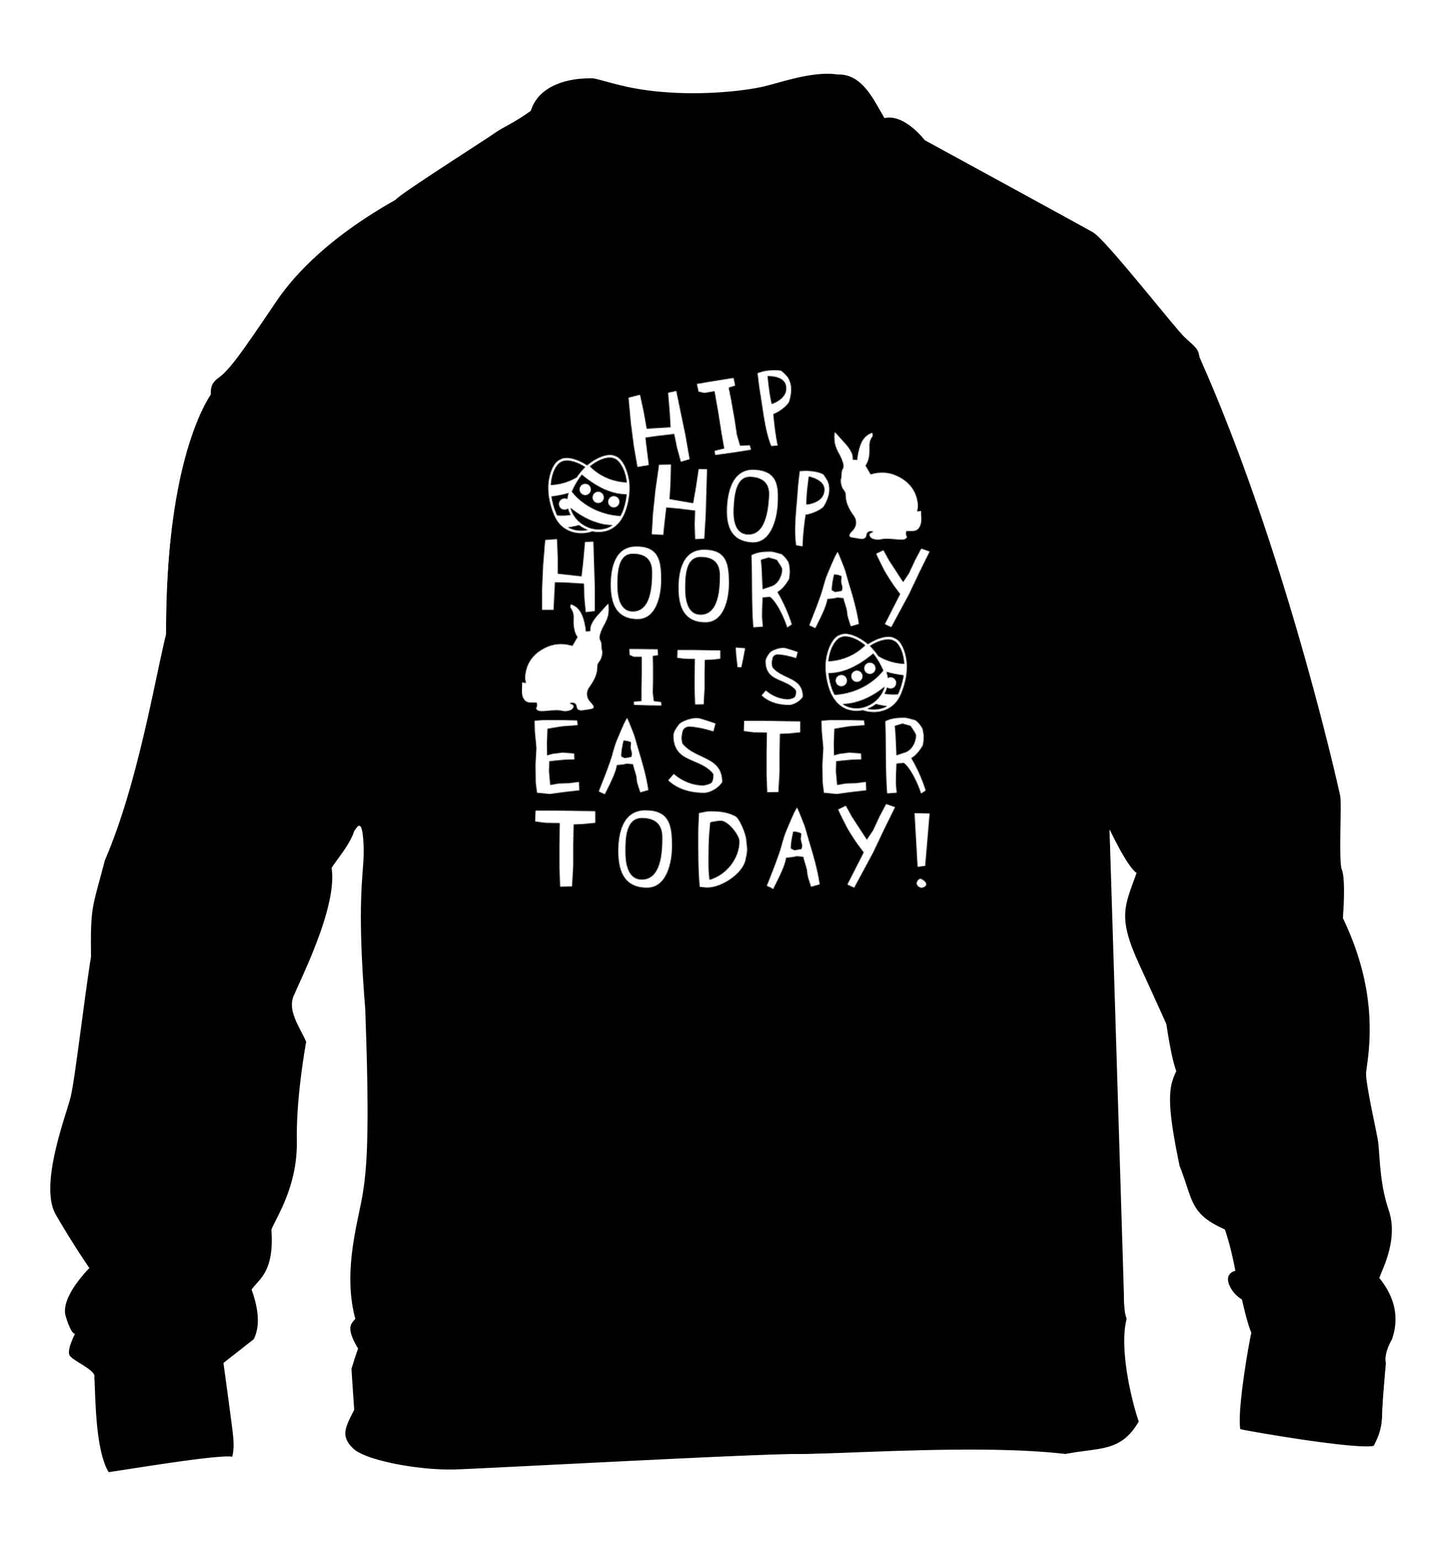 Hip hip hooray it's Easter today! children's black sweater 12-13 Years